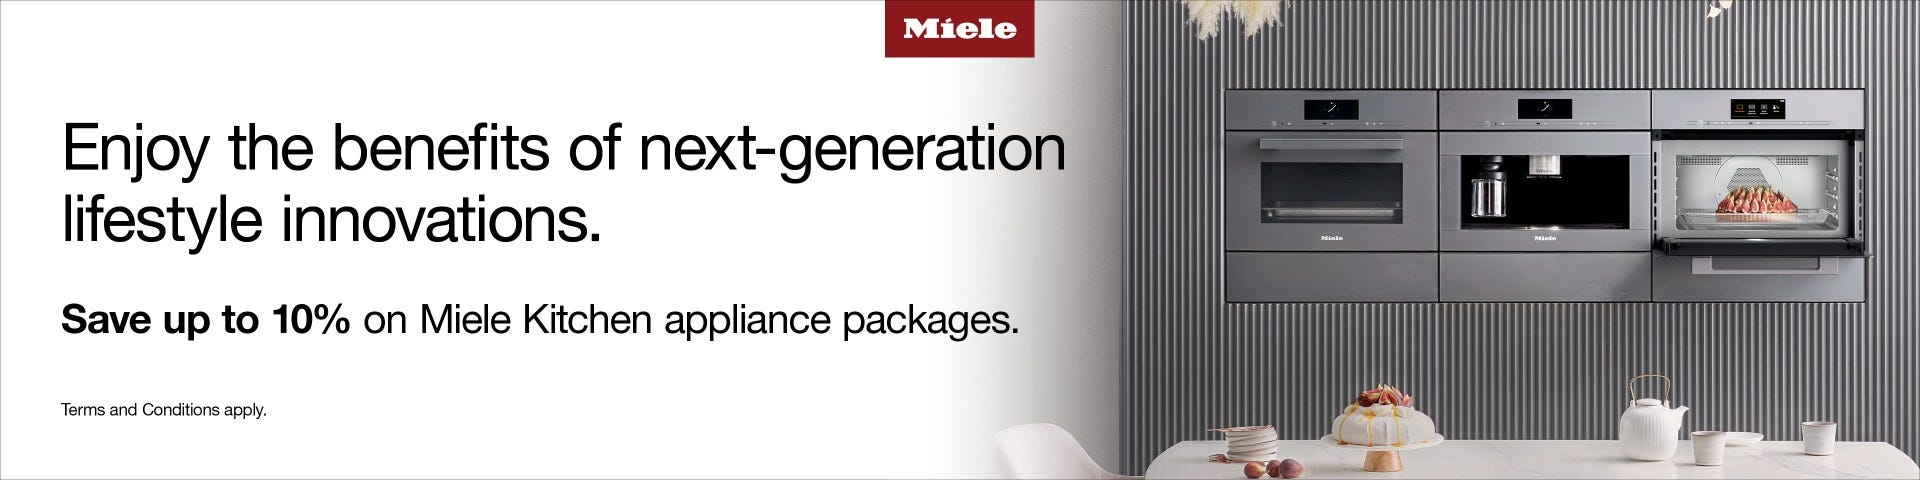 Save up to 10% on Miele Kitchen appliance packages with e&s. Conditions apply.